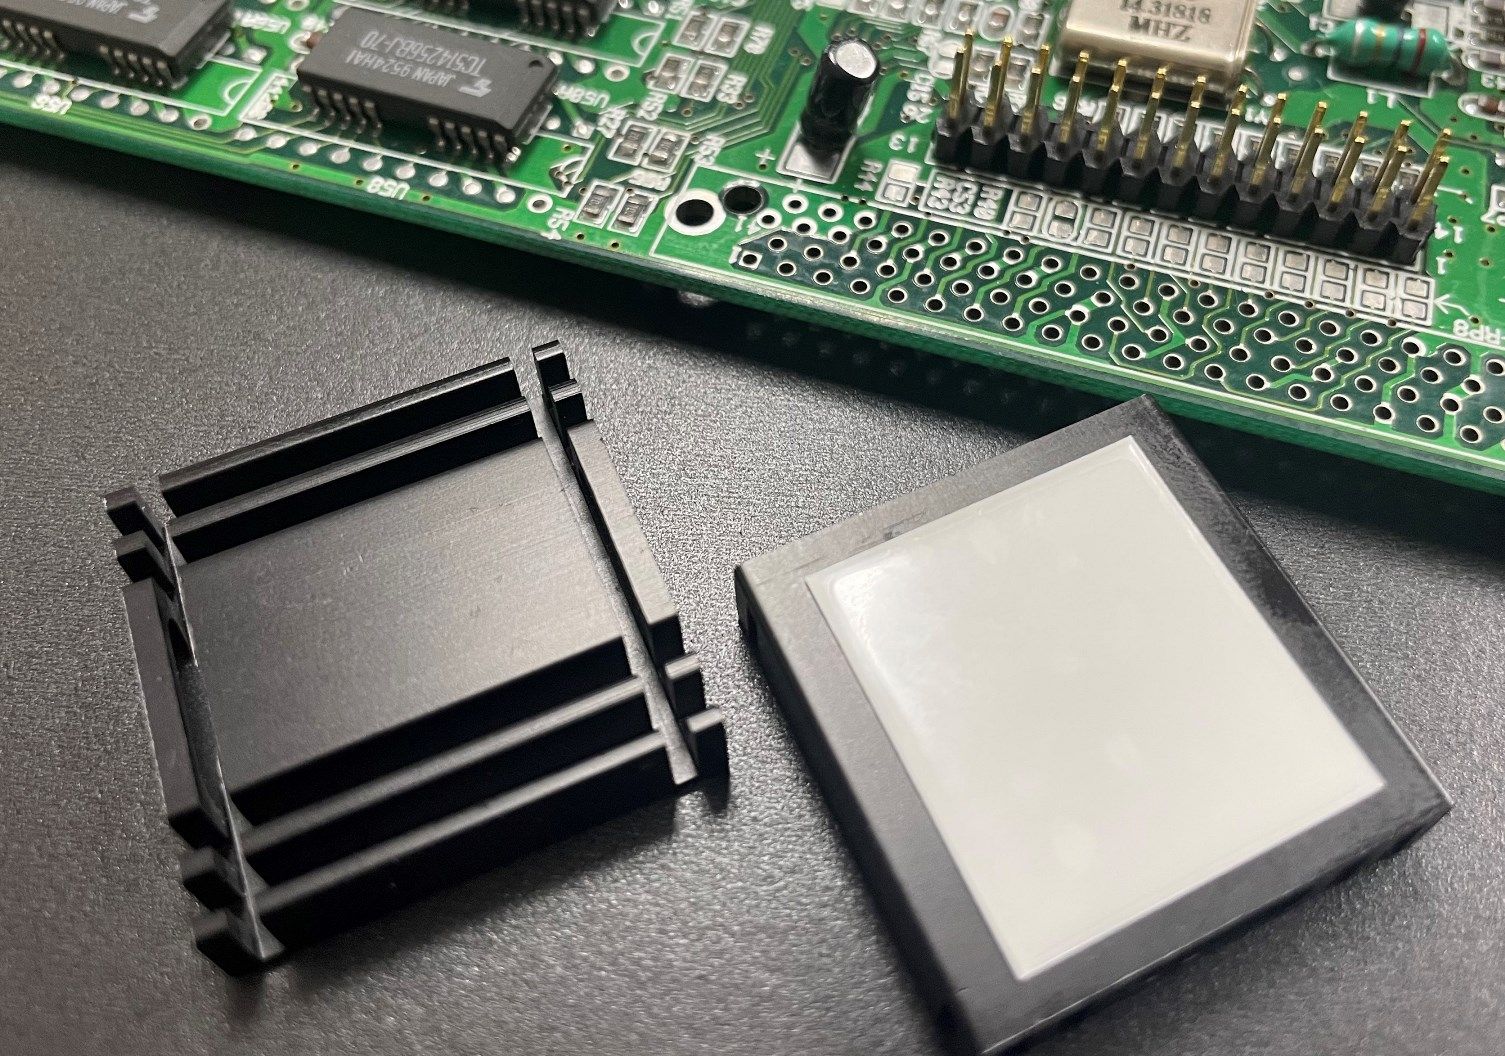 Thermally conductive pressure sensitive adhesives allow for excellent thermal transfer between electronic device and heat sink as well as quick stick adhesion